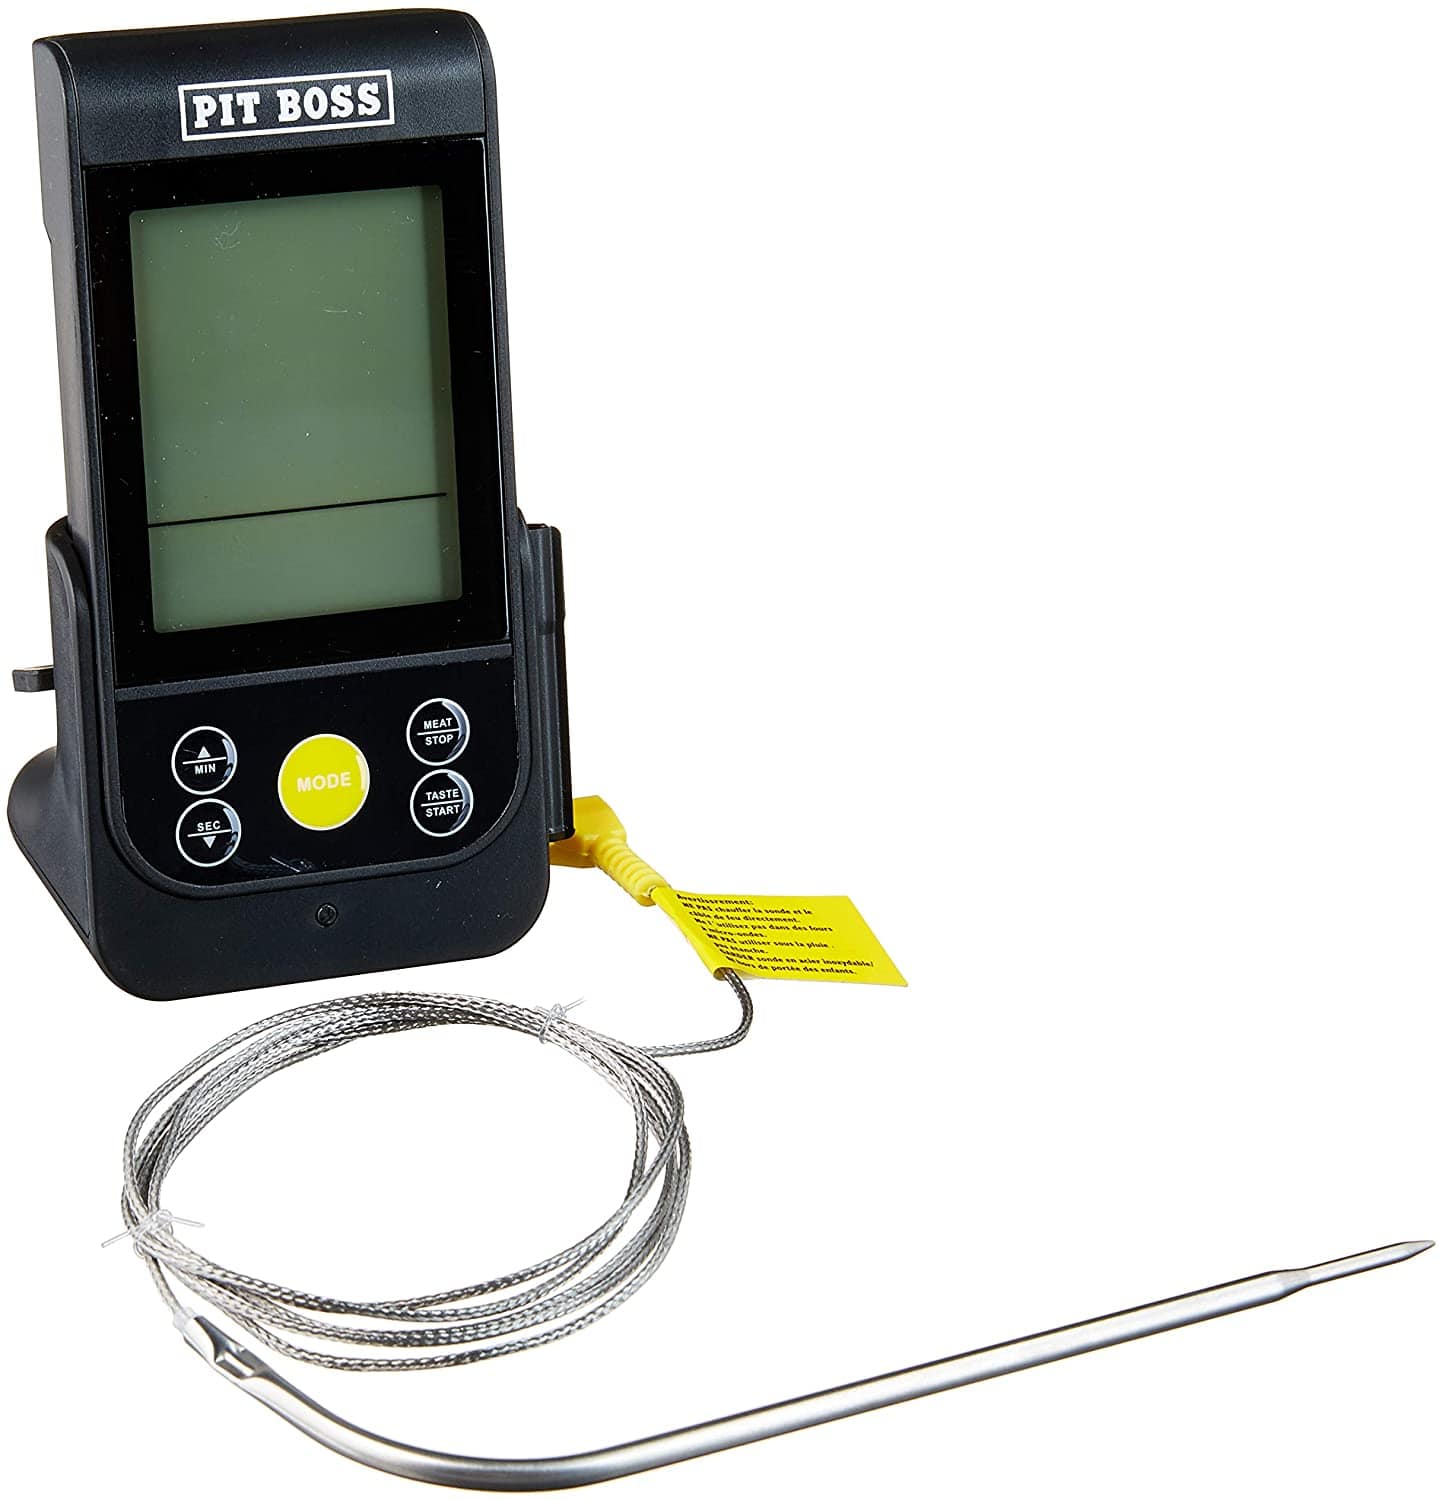 Pit Boss Pit Boss Remote Grill Thermometer